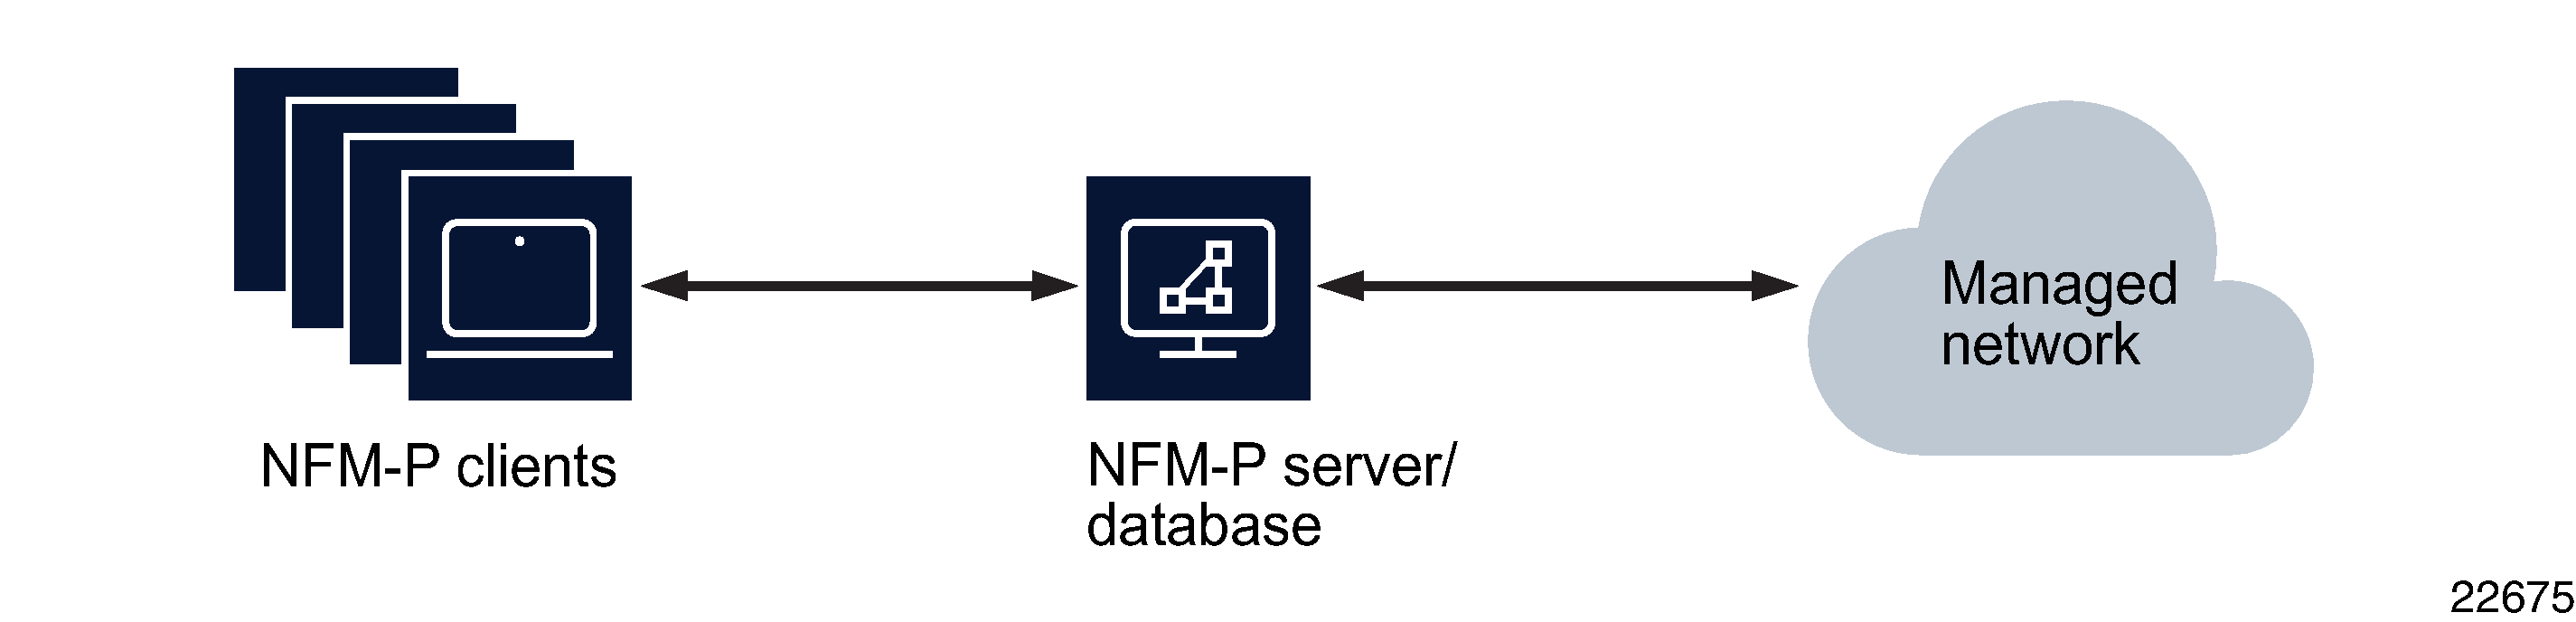 Collocated standalone NFM-P deployment